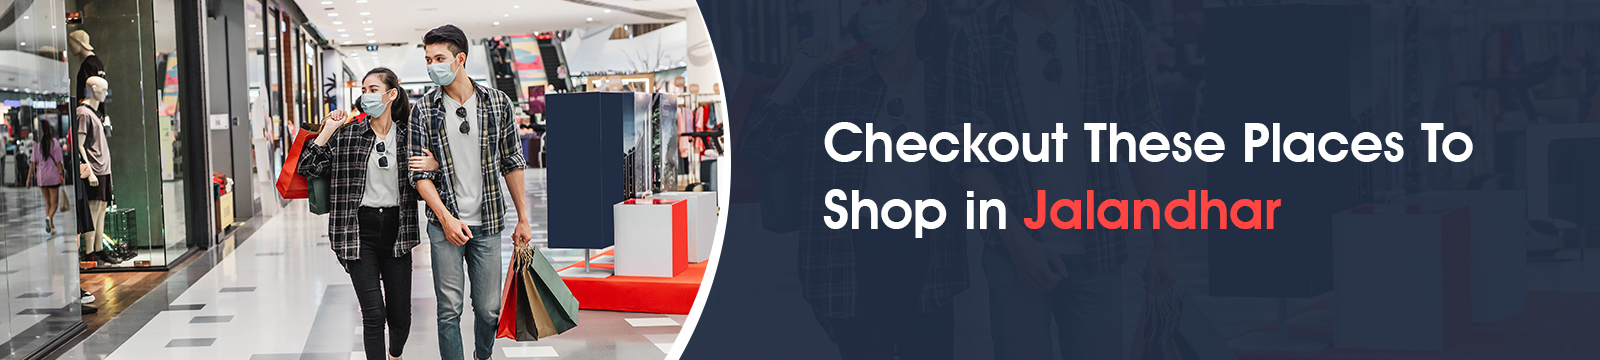 Check Out These Places to Shop in Jalandhar